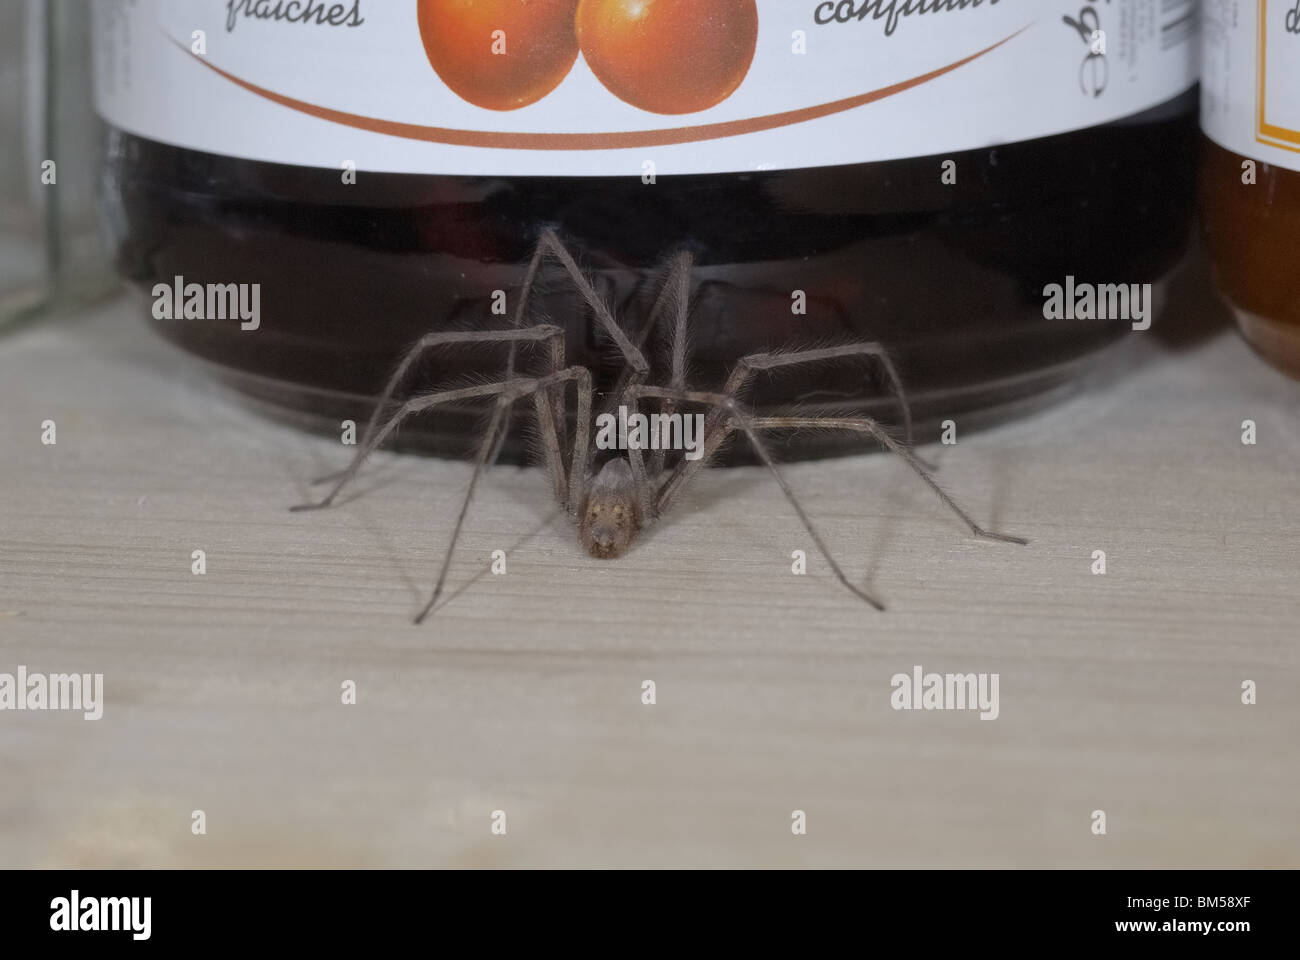 House spider standing near a pot of jam in a kitchen cupboard Stock Photo